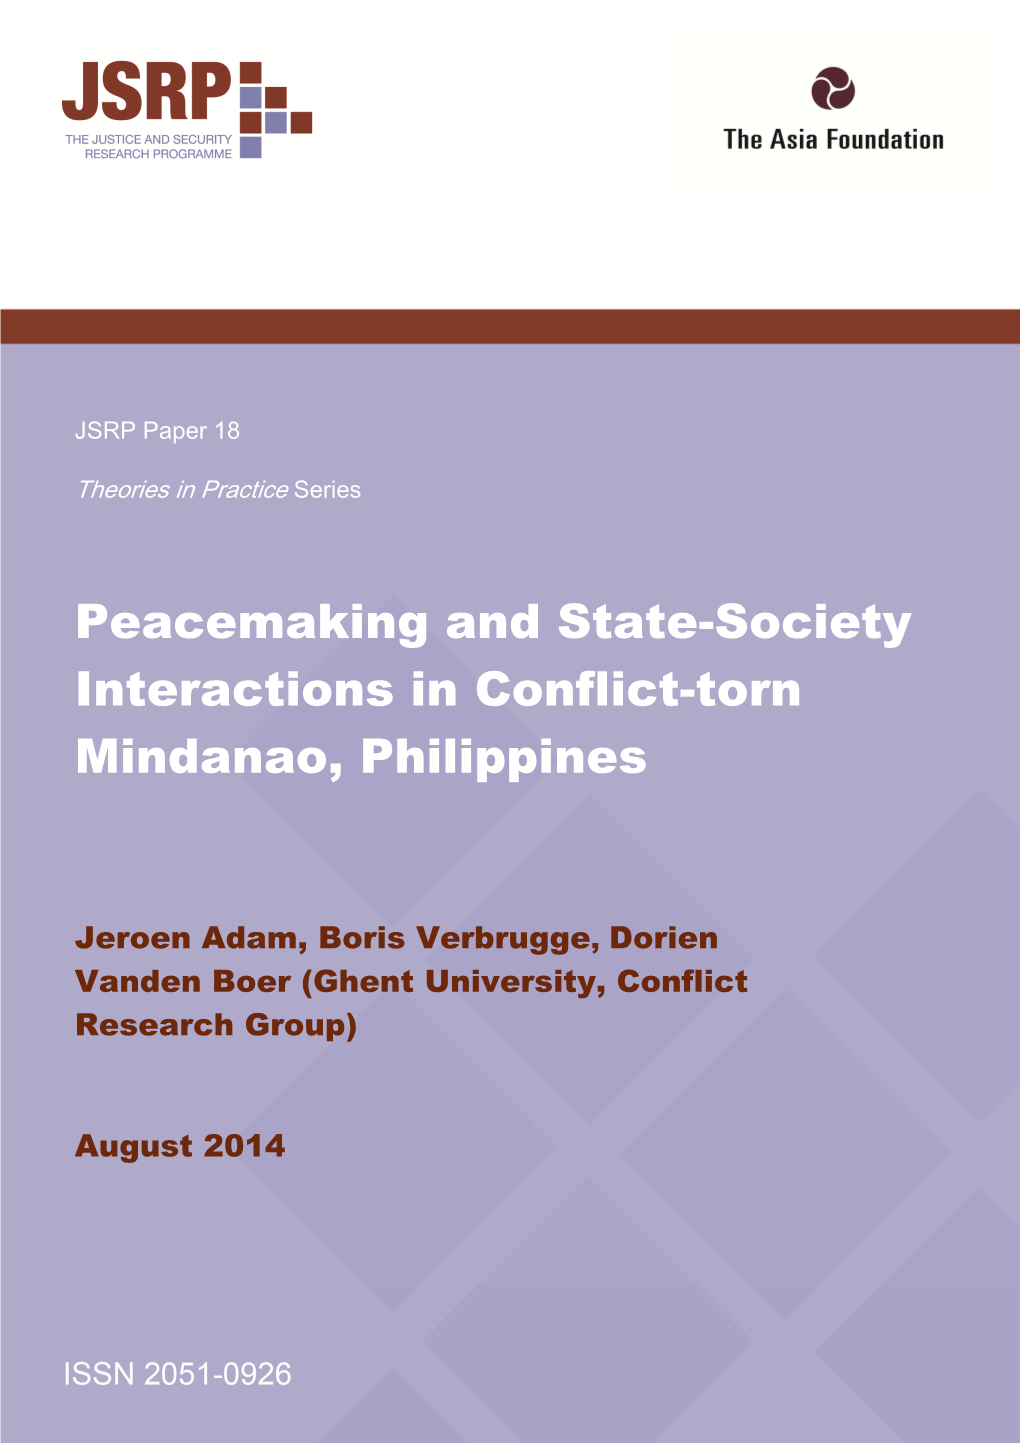 Peacemaking and State-Society Interactions in Conflict-Torn Mindanao, Philippines